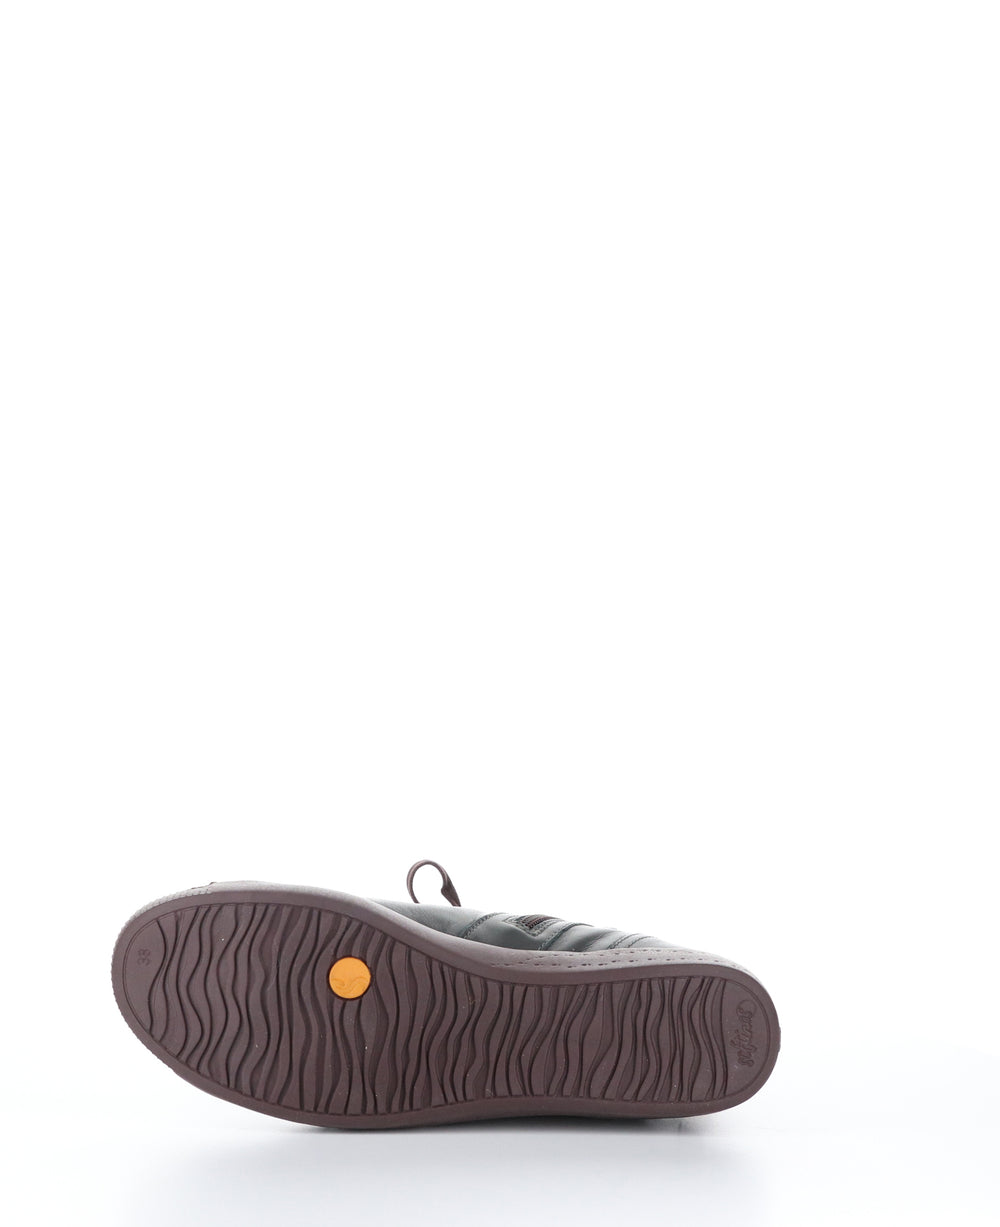 IBBI653SOF Grey Round Toe Shoes|IBBI653SOF Chaussures à Bout Rond in Gris